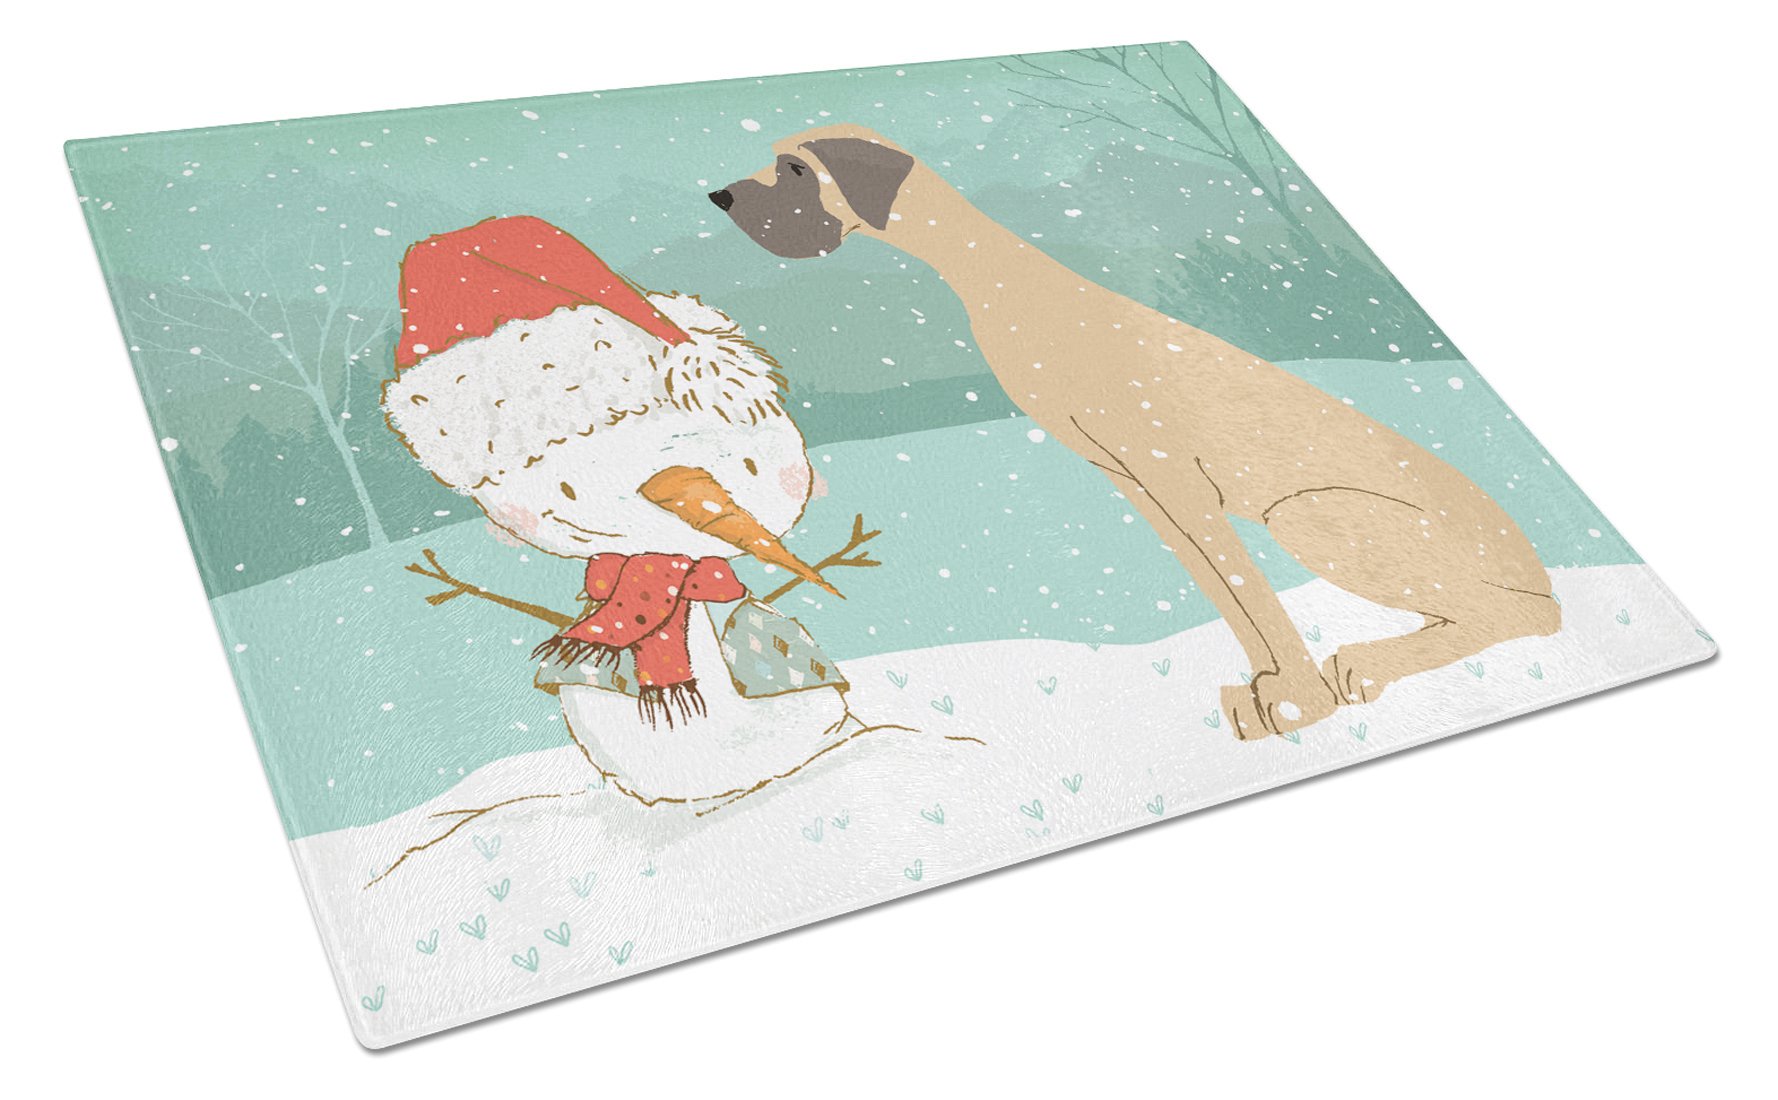 Fawn Natural Great Dane Snowman Christmas Glass Cutting Board Large CK2040LCB by Caroline's Treasures